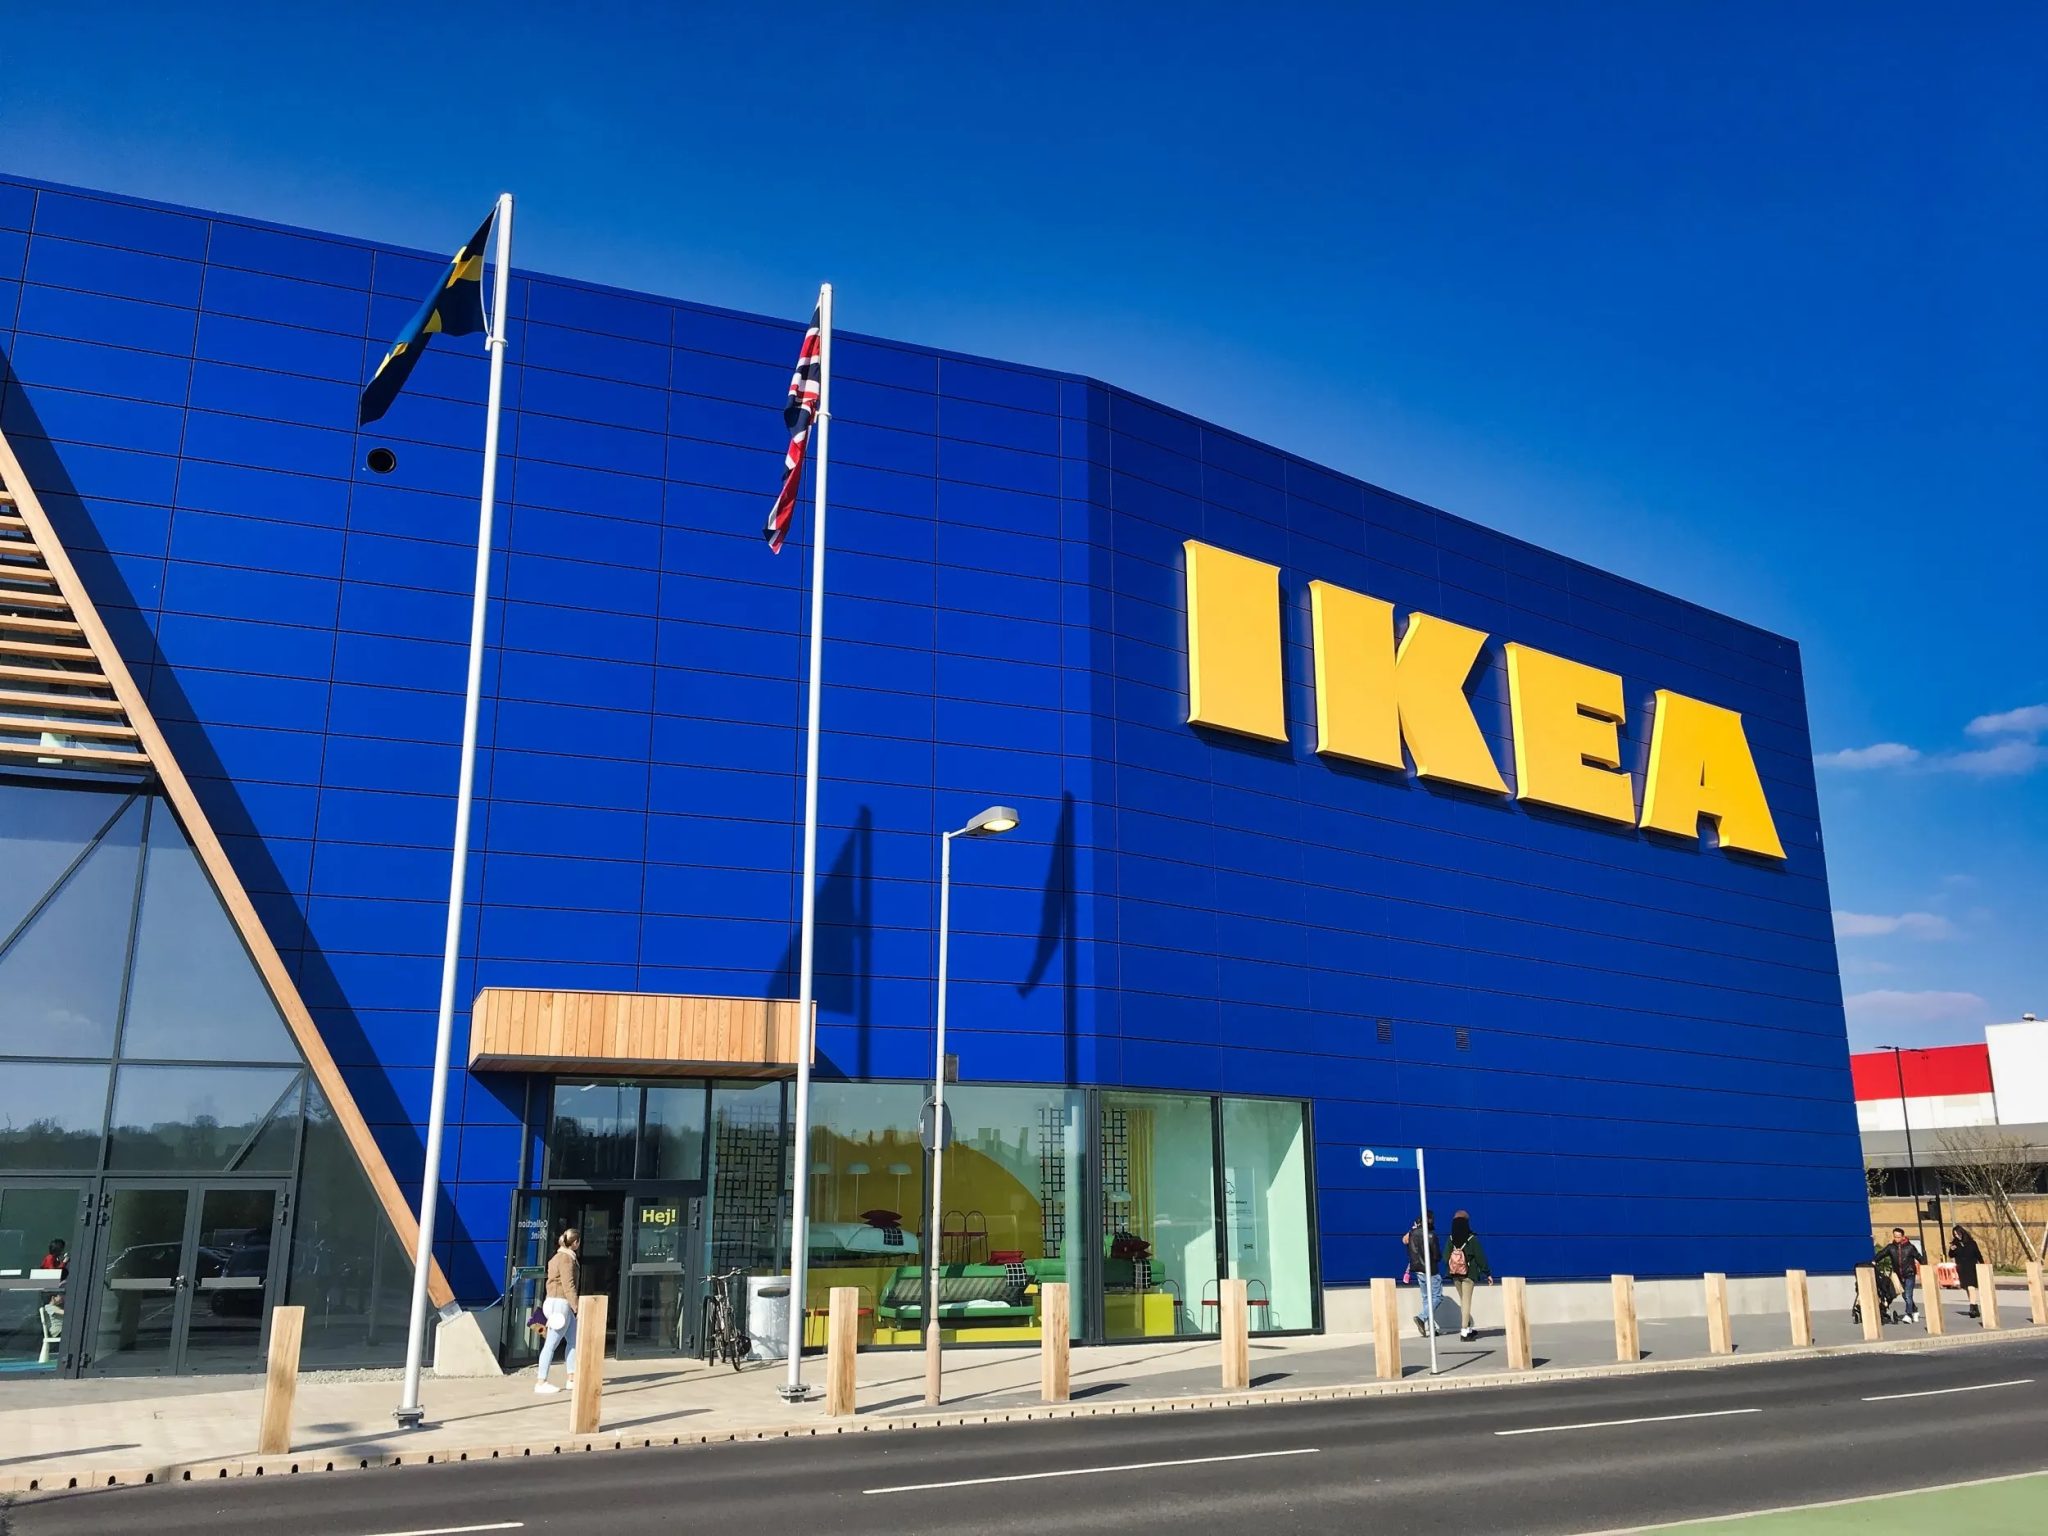 IKEA Resilience: Prices to Drop Despite Red Sea Disruptions, CEO Confirms" IKEA remains committed to planned price reductions despite disruptions in Red Sea shipping that have led to increased costs. The budget furniture giant assures it has ample stocks to absorb any potential shocks in its supply chain, according to Jesper Brodin, CEO of Ingka Group, which owns the majority of IKEA stores globally. Ingka Group has invested over 1 billion euros ($1.1 billion) in price reductions across its markets from September to November and intends to continue the trend by lowering prices throughout 2024. Shipping disruptions caused by Houthi militant attacks in Yemen, carried out in solidarity with Palestinians, have forced shipping companies to reroute vessels around the southern tip of Africa, resulting in longer and more expensive journeys. Despite concerns about rising transport costs contributing to inflationary pressures, Brodin remains optimistic, stating that there is still "quite significant deflation" upstream in IKEA's supply chain. While lowering product prices may impact profits, Brodin emphasizes IKEA's strategy to gain market share during times when consumers face financial pressures. He notes that this is not a year for profit optimization but rather a time to navigate with thinner profits while supporting people. In addition to maintaining affordability, IKEA has plans for global expansion. Brodin confirms the brand's intention to grow its presence in China and India, citing a rebound in the Chinese market. The furniture giant's resilience in prioritizing customer affordability and strategic market positioning highlights its commitment to weathering challenges and supporting consumers during uncertain economic times.